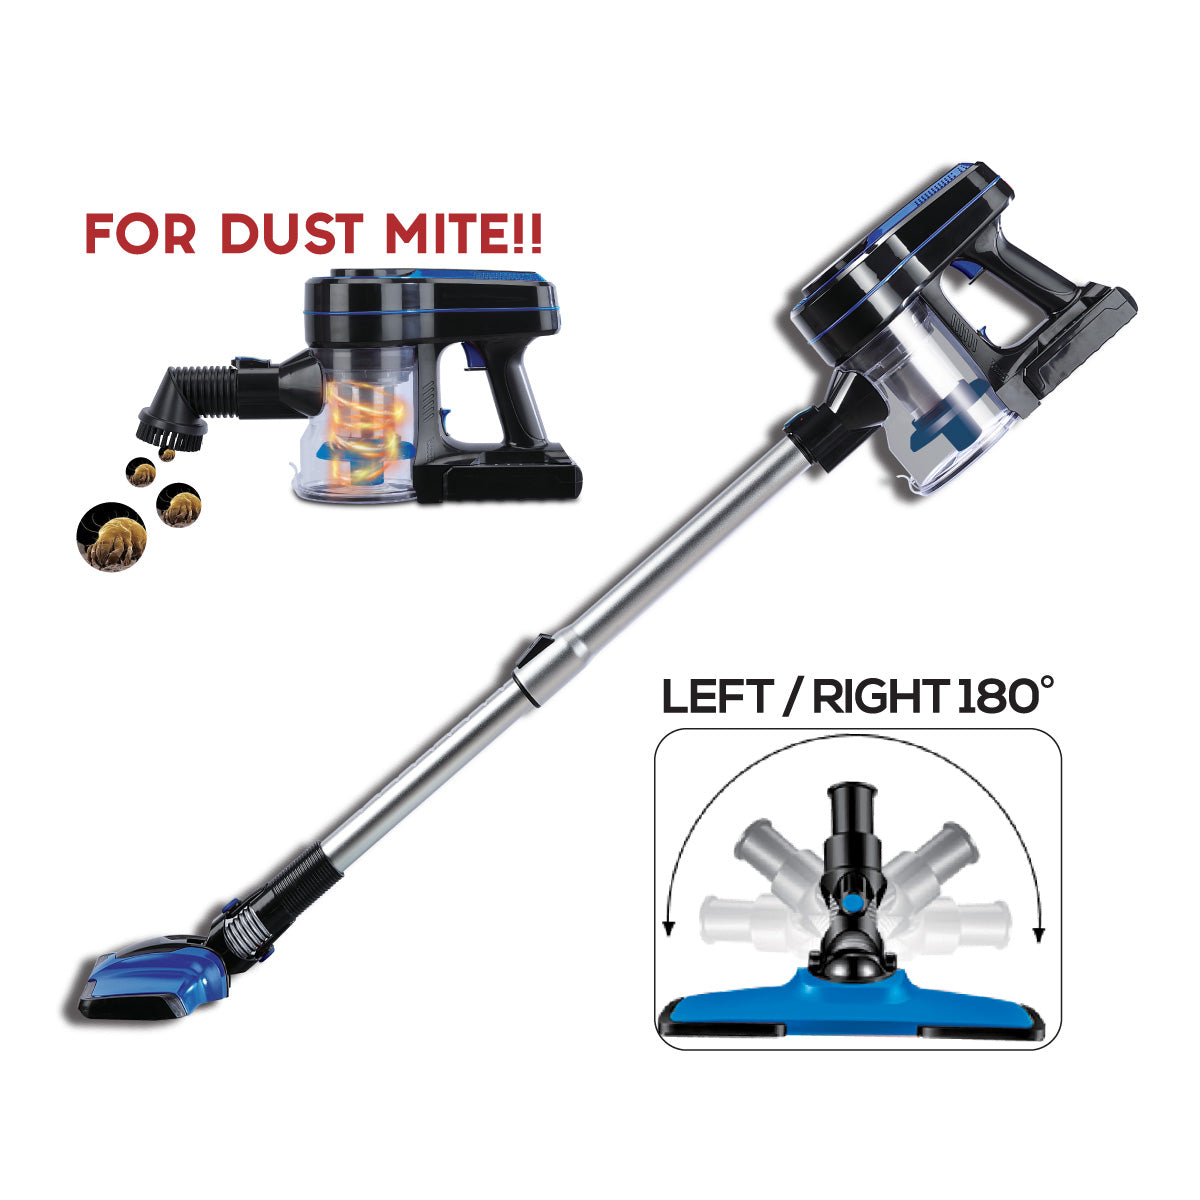 Cordless Vacuum Cleaner, Stick Vacuum , Portable Vacuum Cleaner ,Dust Mite Vacuum Cleaner , Vacuum Cleaner With HEPA Filte(PPV3700)